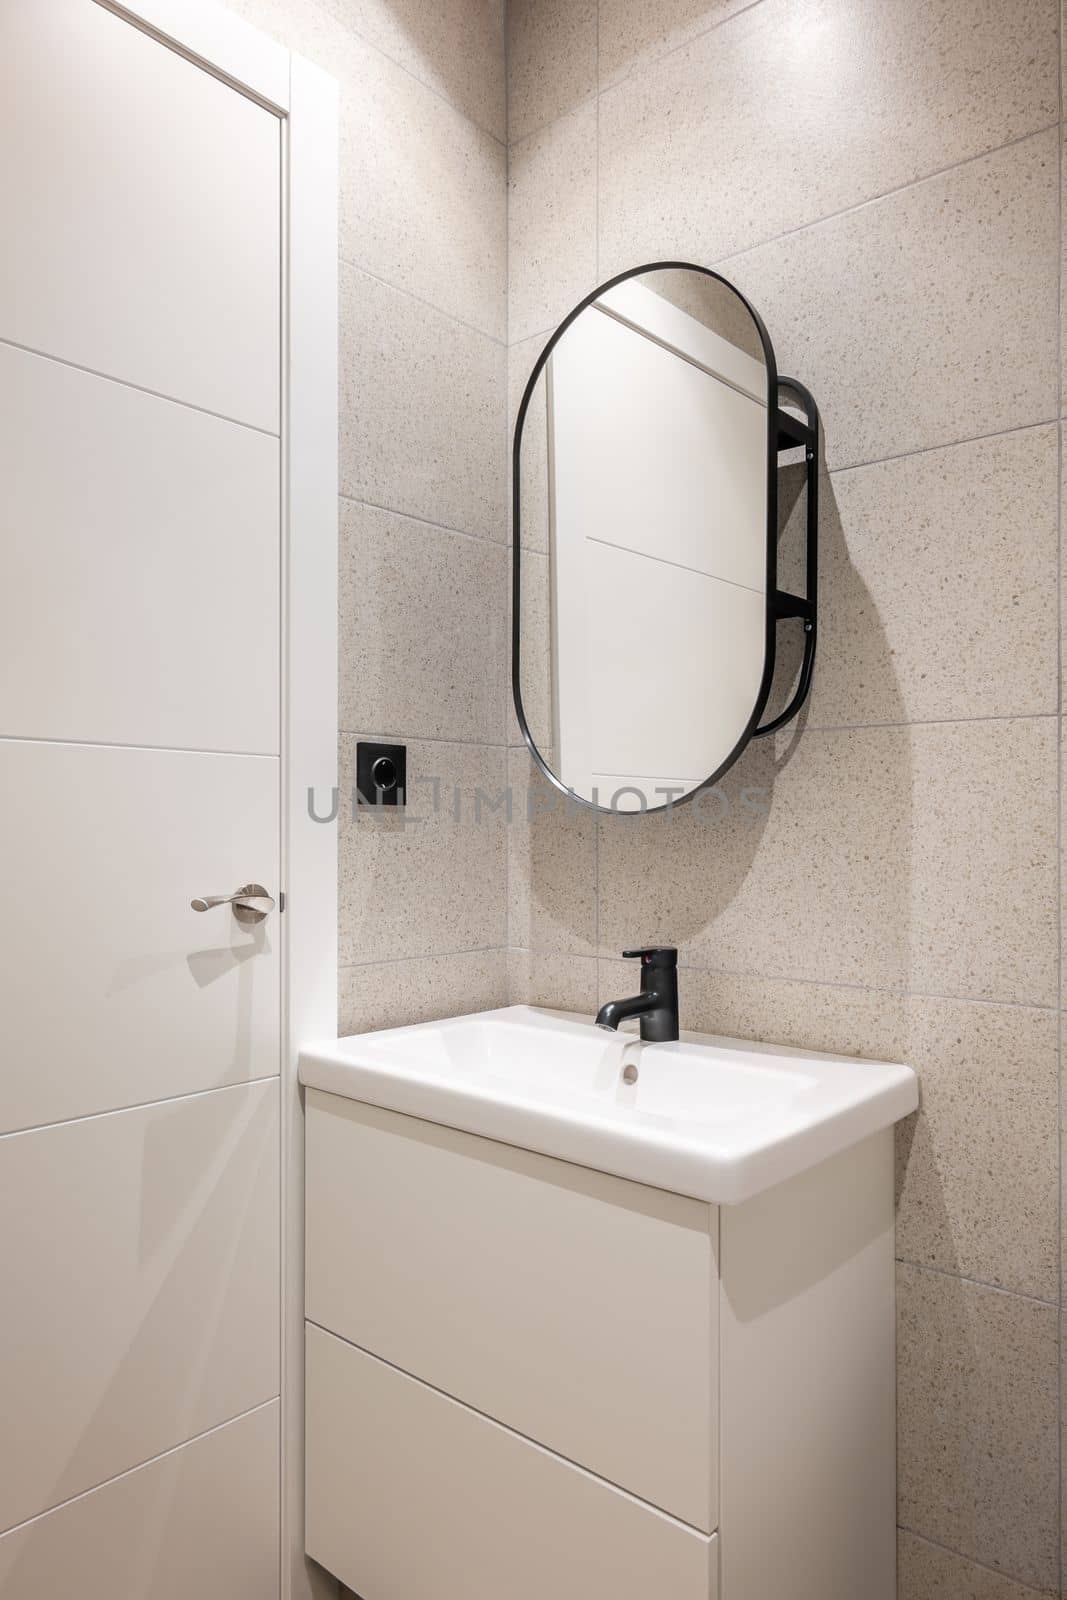 Corner of a bathroom with a white sink on a vanity with two large drawers for bathroom amenities. Above the sink is an oval designer mirror. Decorative elements made of black metal. by apavlin